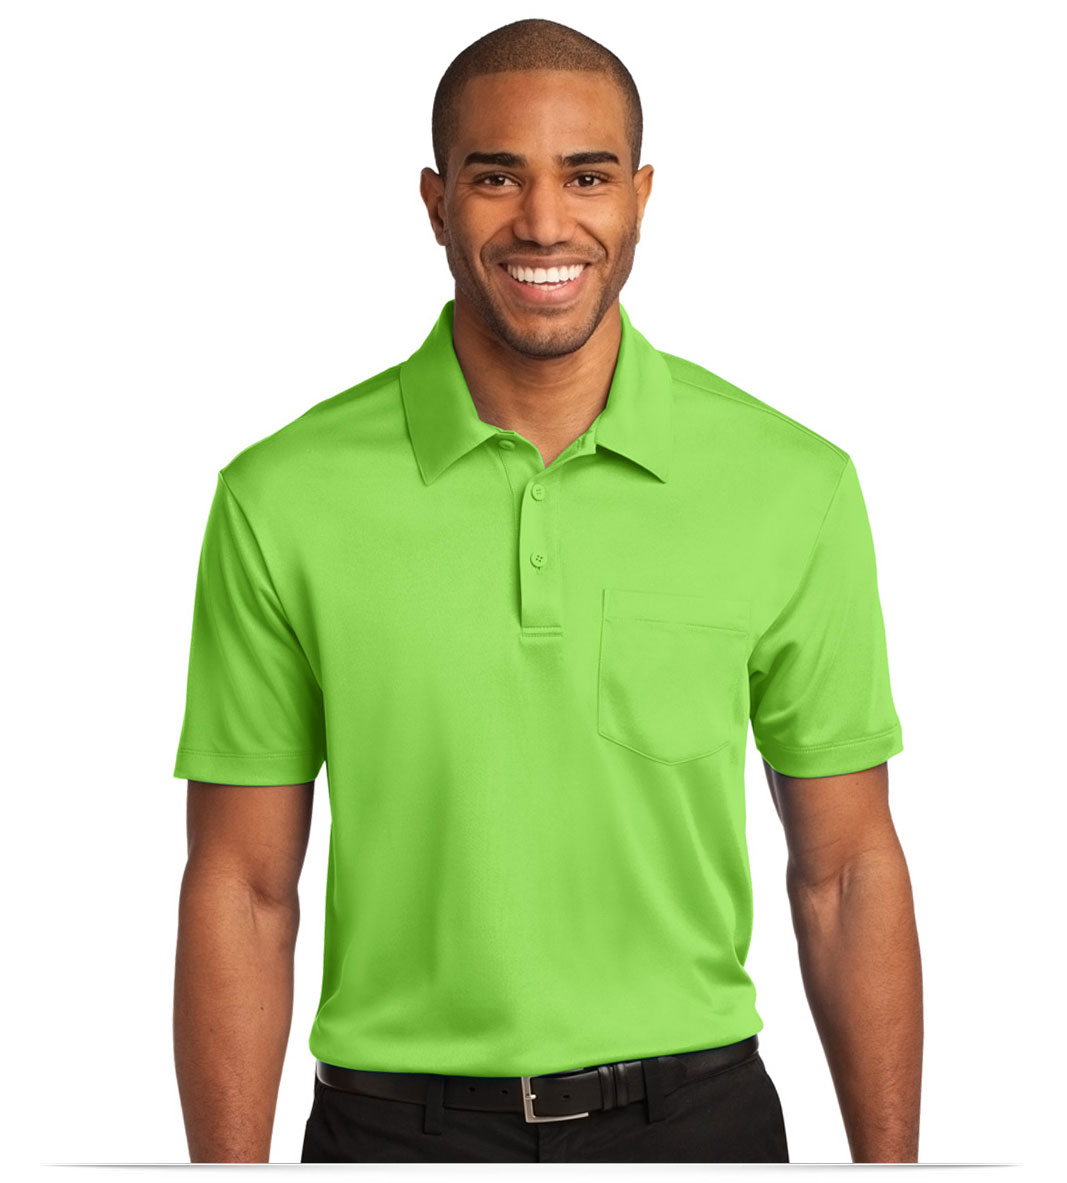 Customize Port Authority Silk Touch Pocket Polo